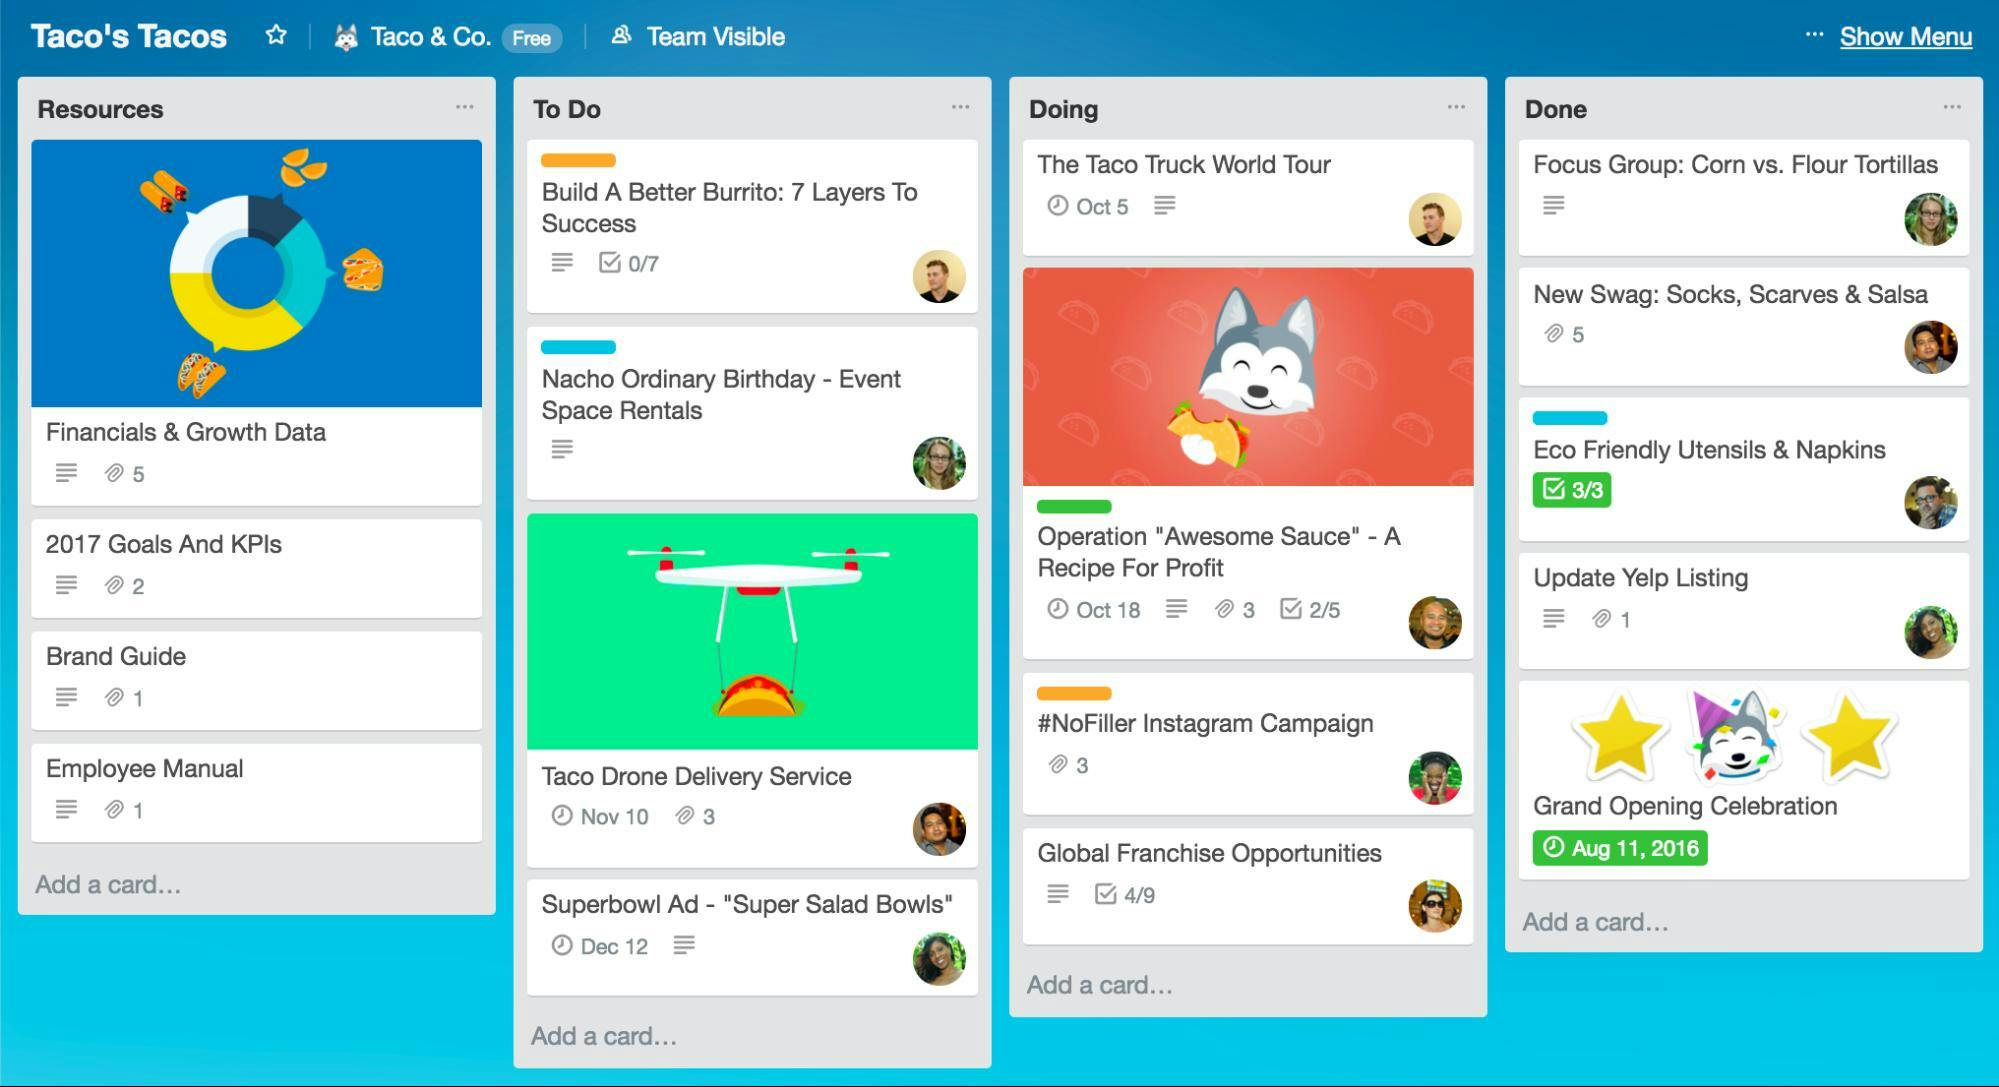 Get started with Kanban using Trello boards